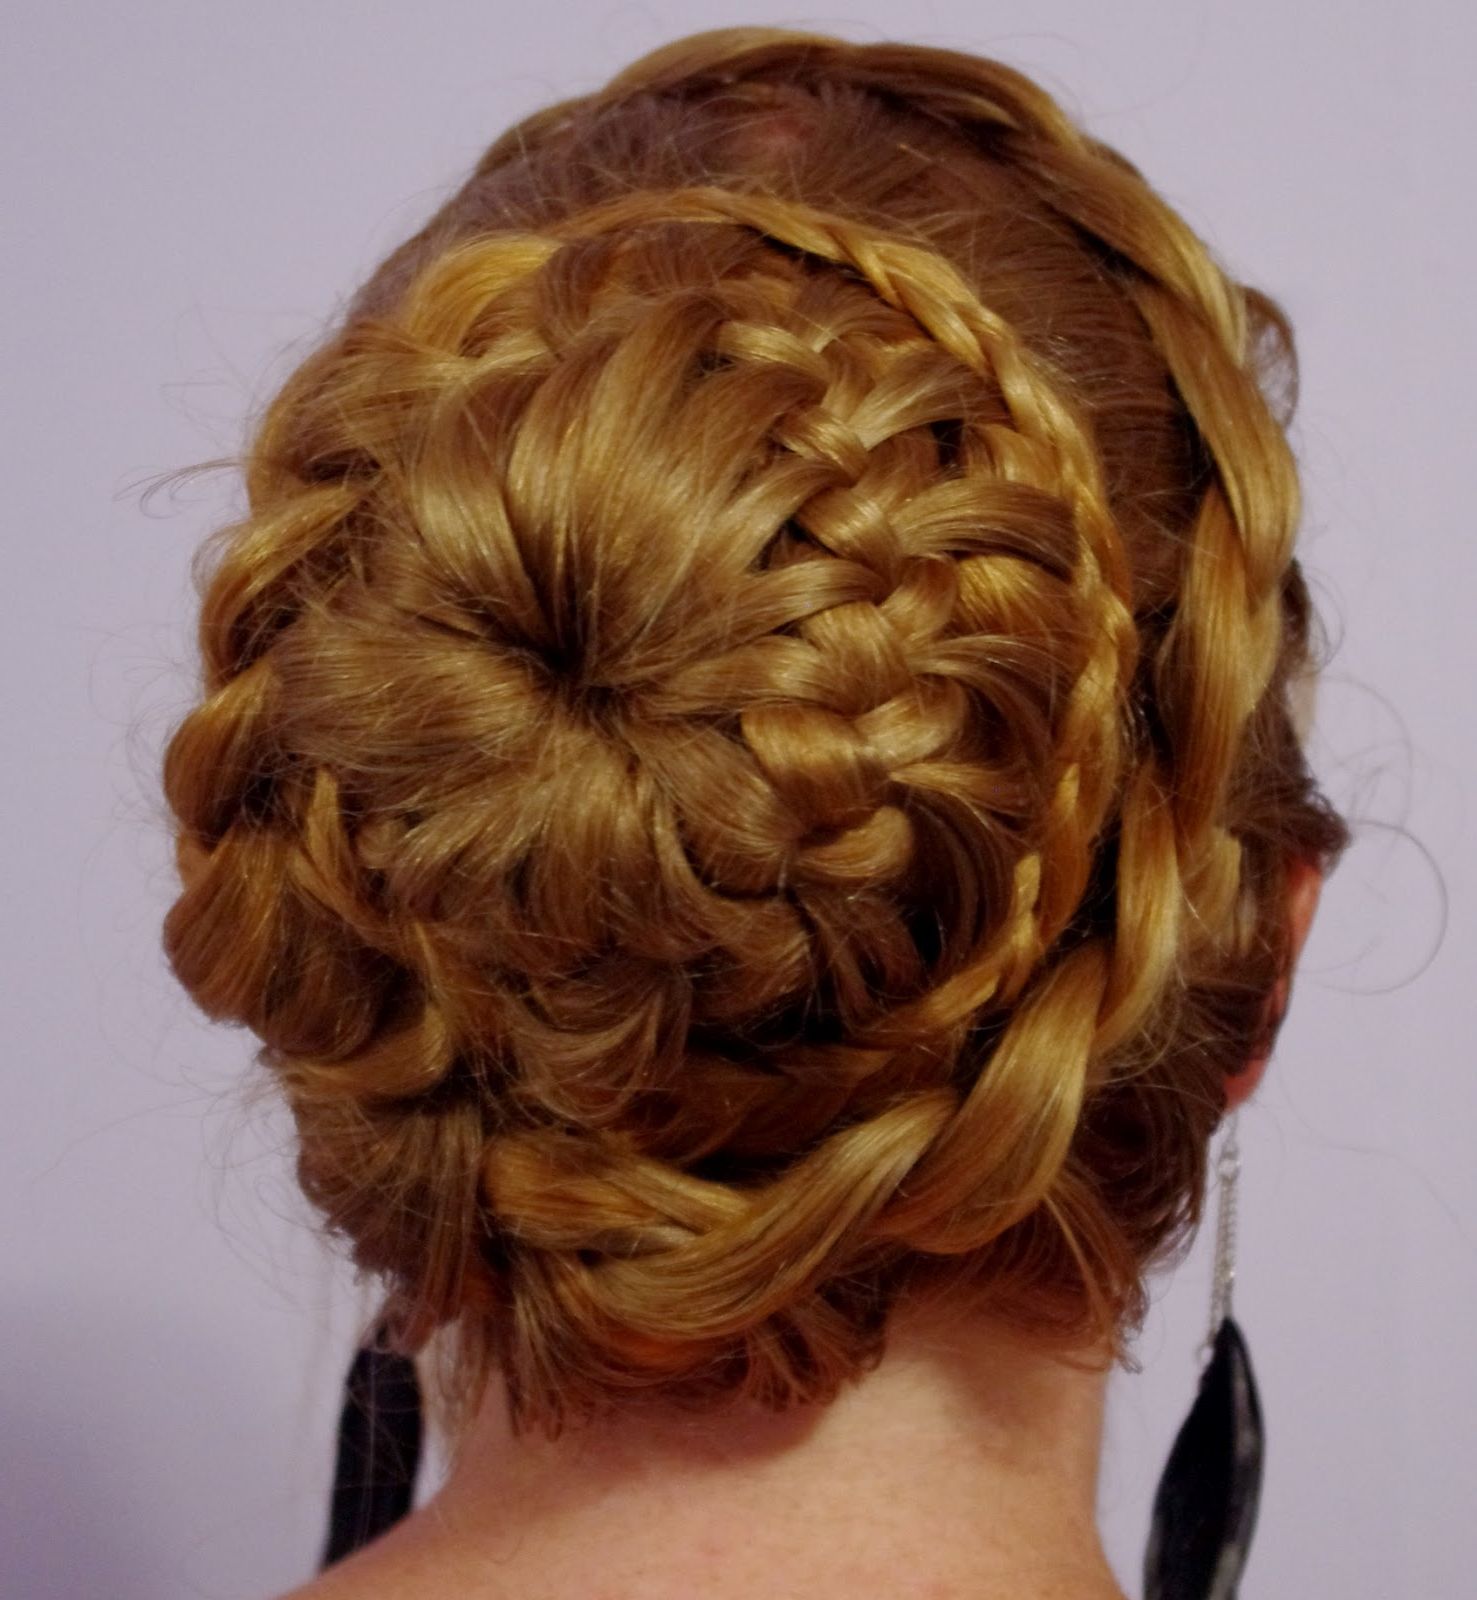 2019 Fancy Braided Hairstyles Intended For Braids & Hairstyles For Super Long Hair: Fancy Braided Bun (Gallery 9 of 20)